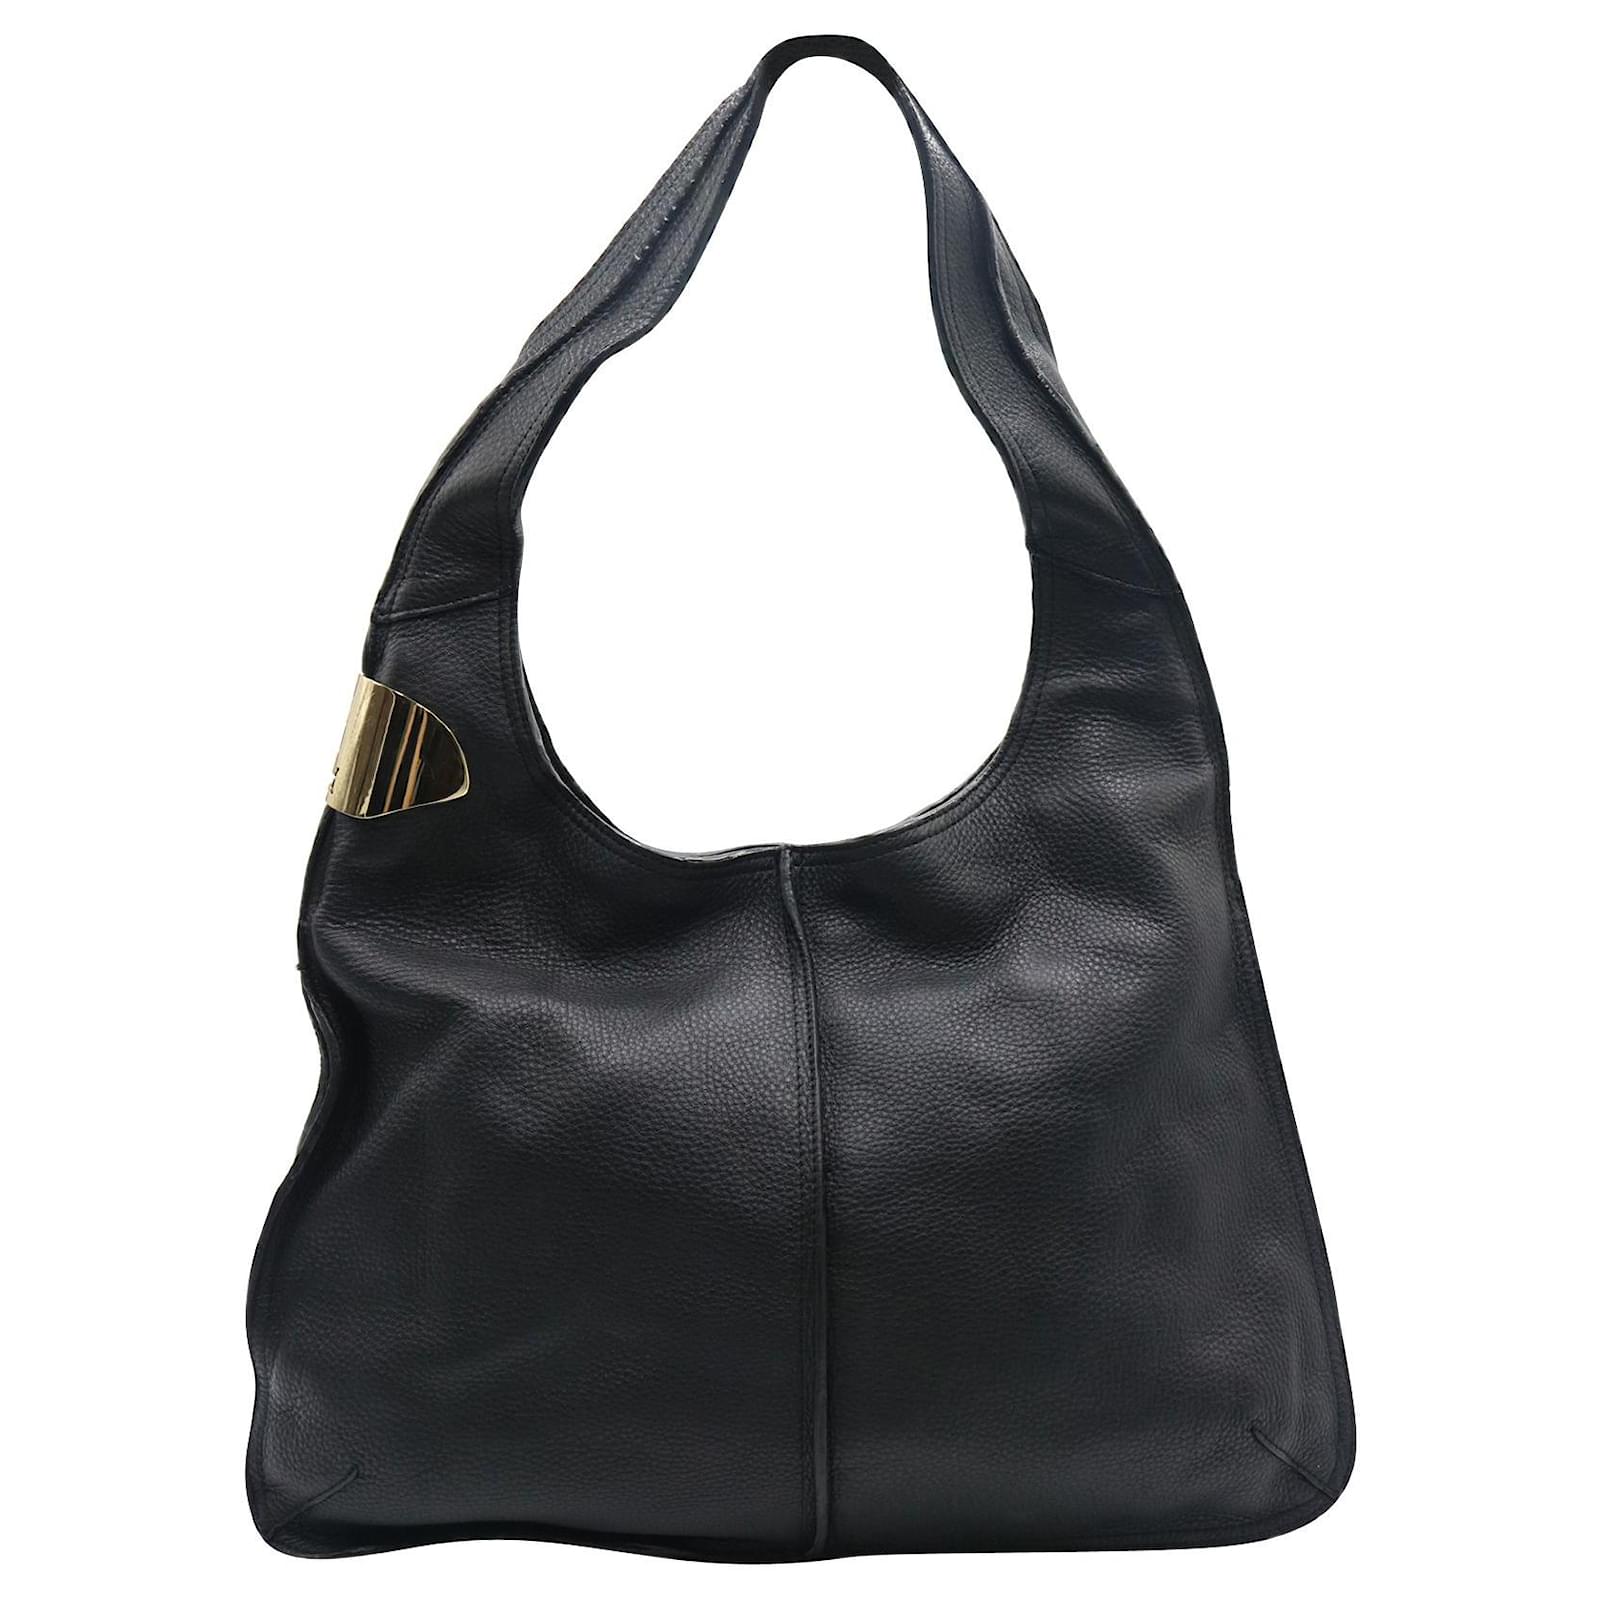 Halston Heritage Black Leather Shoulder Bag with Gold Buckle Feature ...